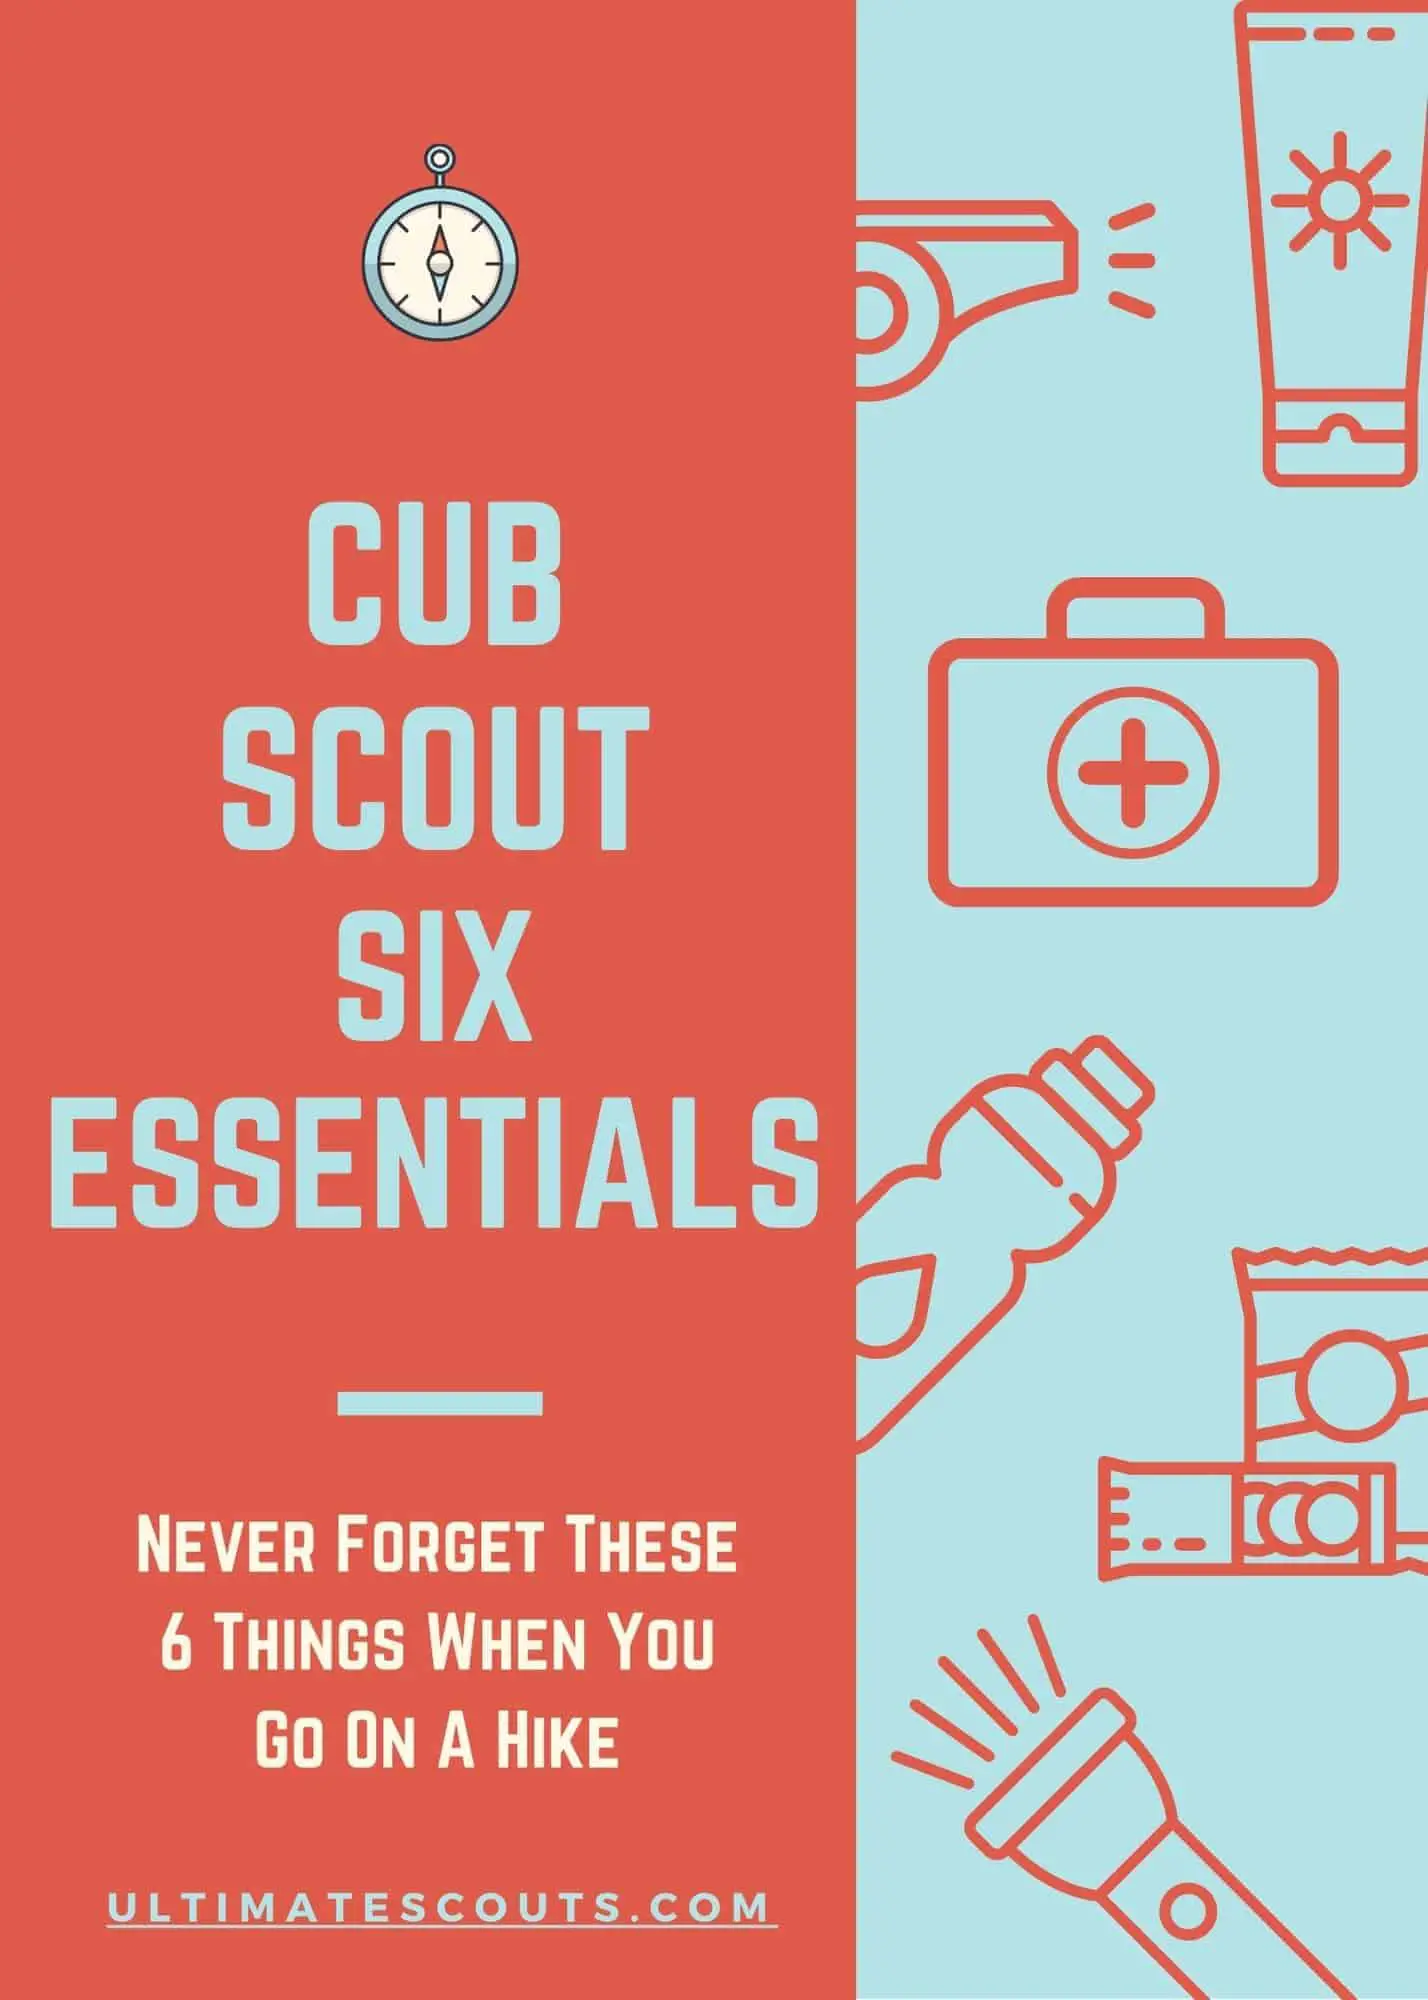 What Are The Cub Scout 6 Essentials?